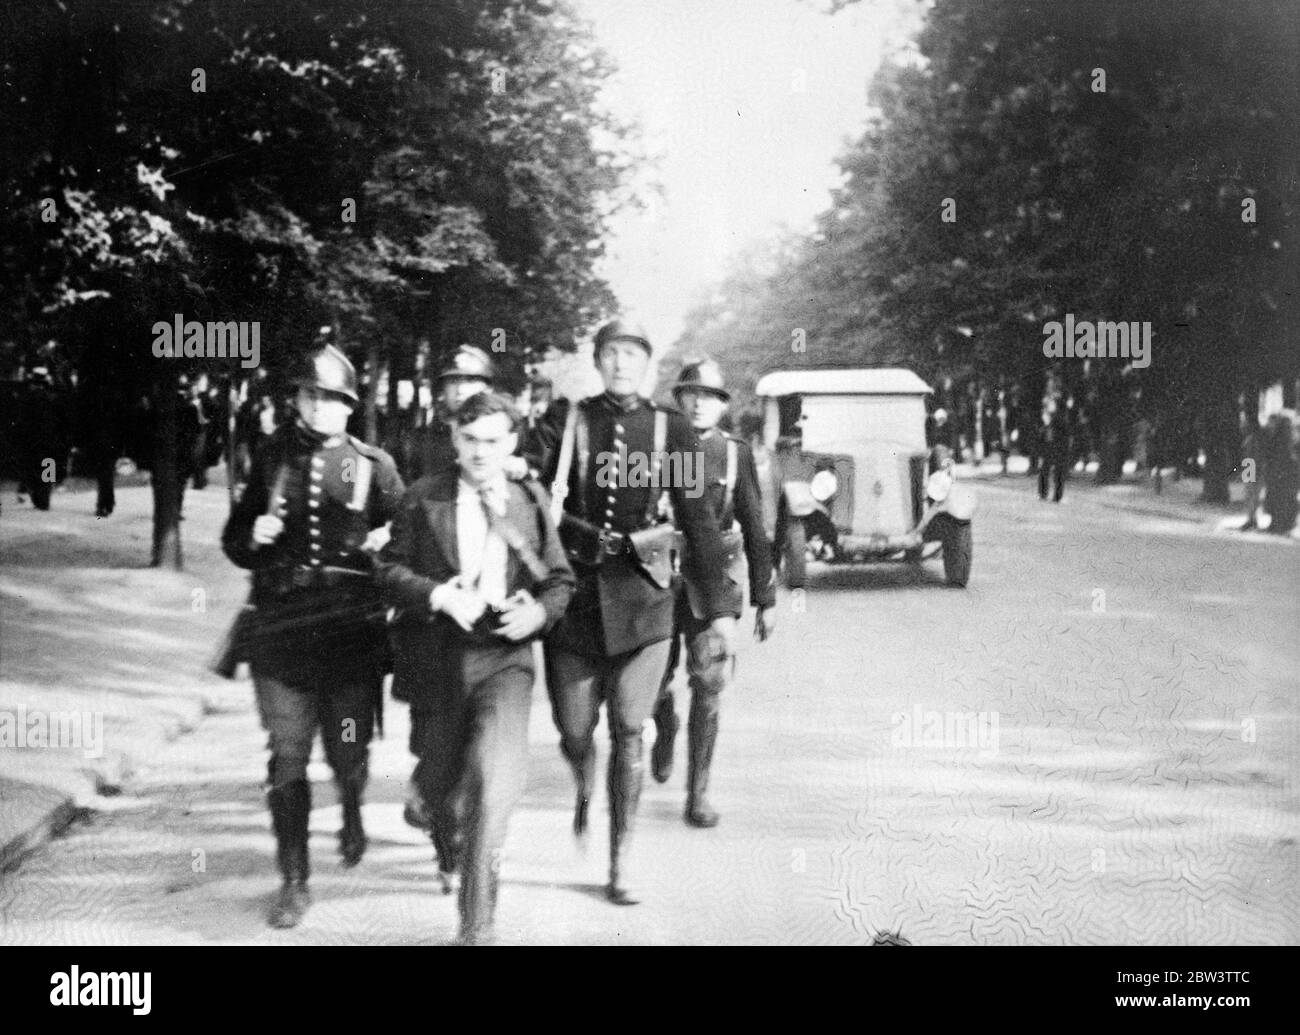 Brest rioters tear up paving stones as missles against police and troops . RIosters in Brest shipping strike caused through the French Goverment ' s econmy cuts . Photo shows , mobile guards escorting an arrested rioter after a serious clash in Brest . 8 August 1935 Stock Photo